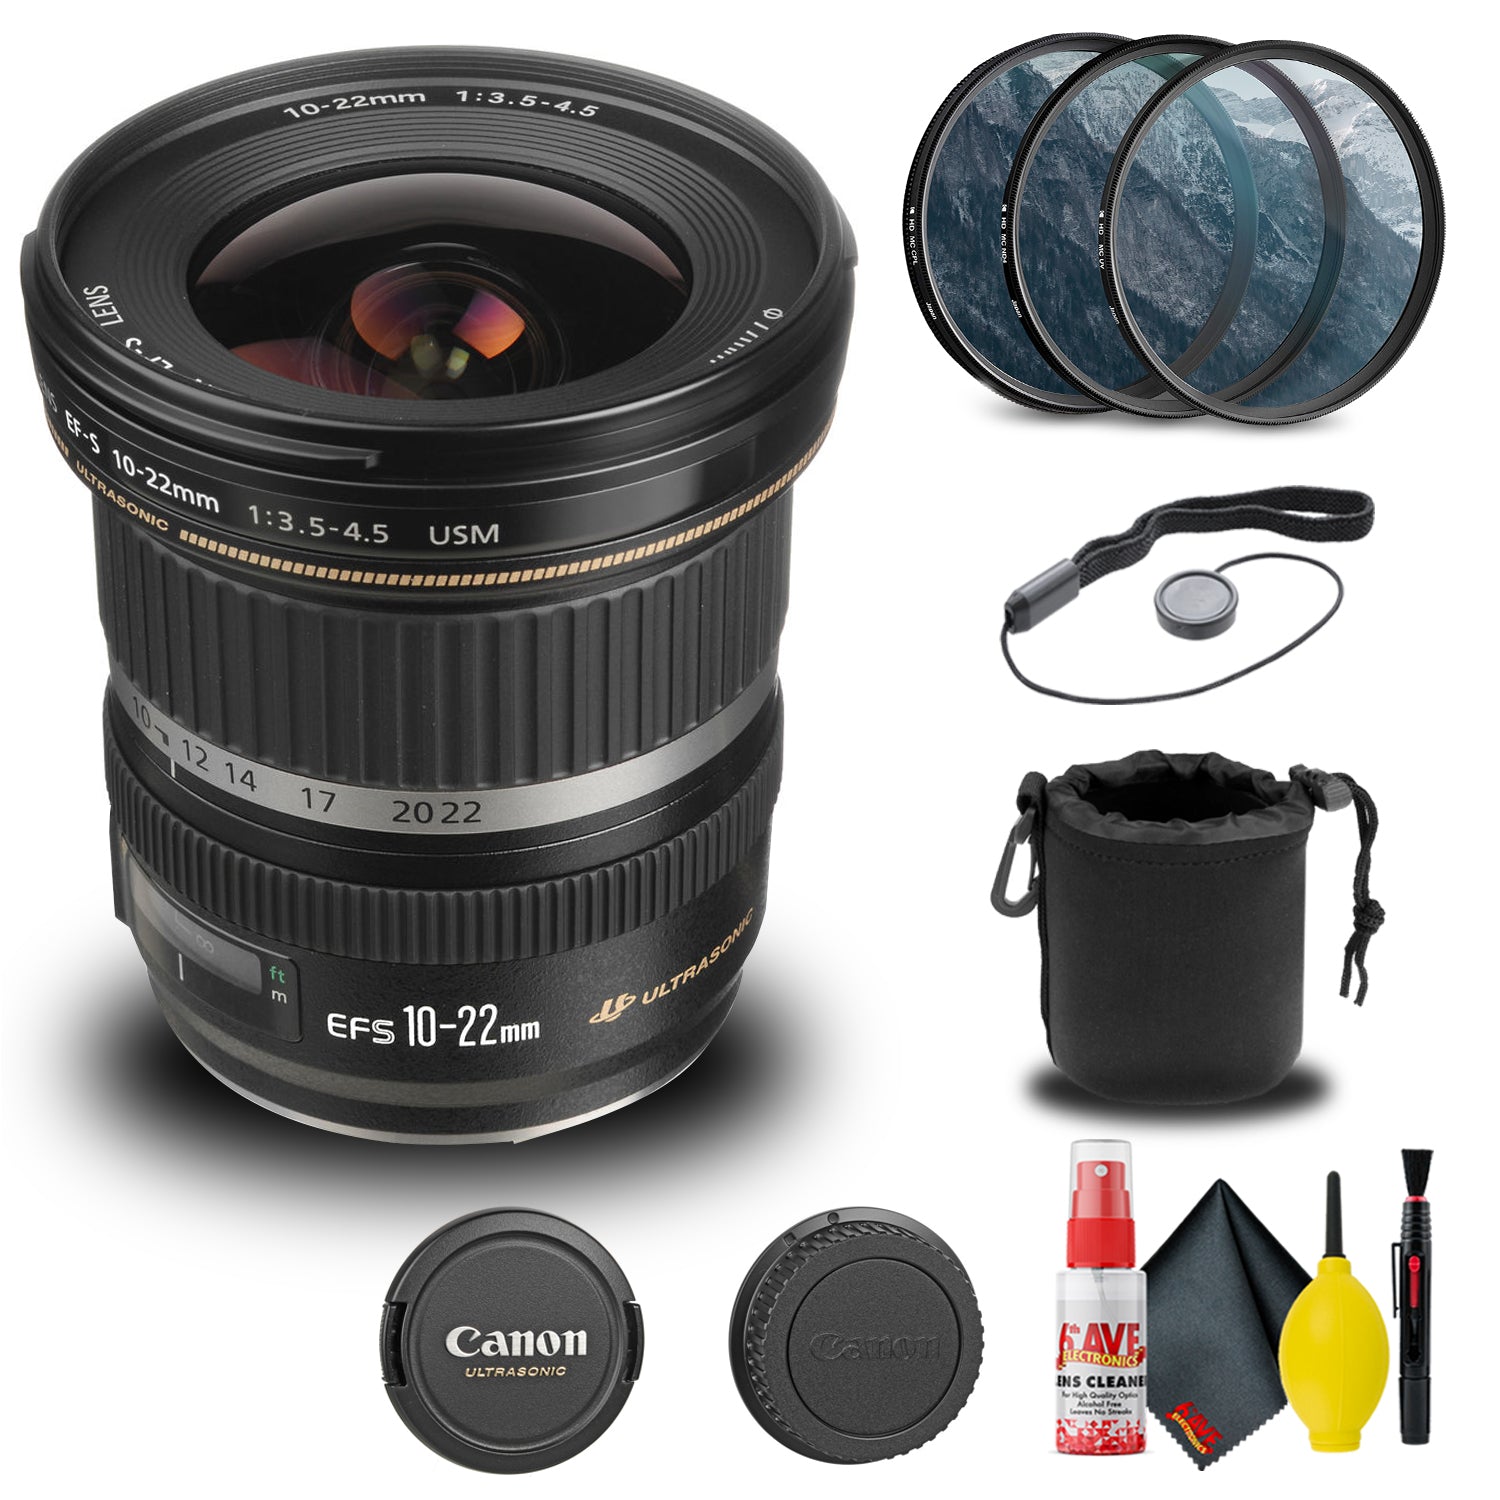 Canon EF-S 10-22mm f/3.5-4.5 USM Lens (9518A002) + Filter + Lens Pouch + More